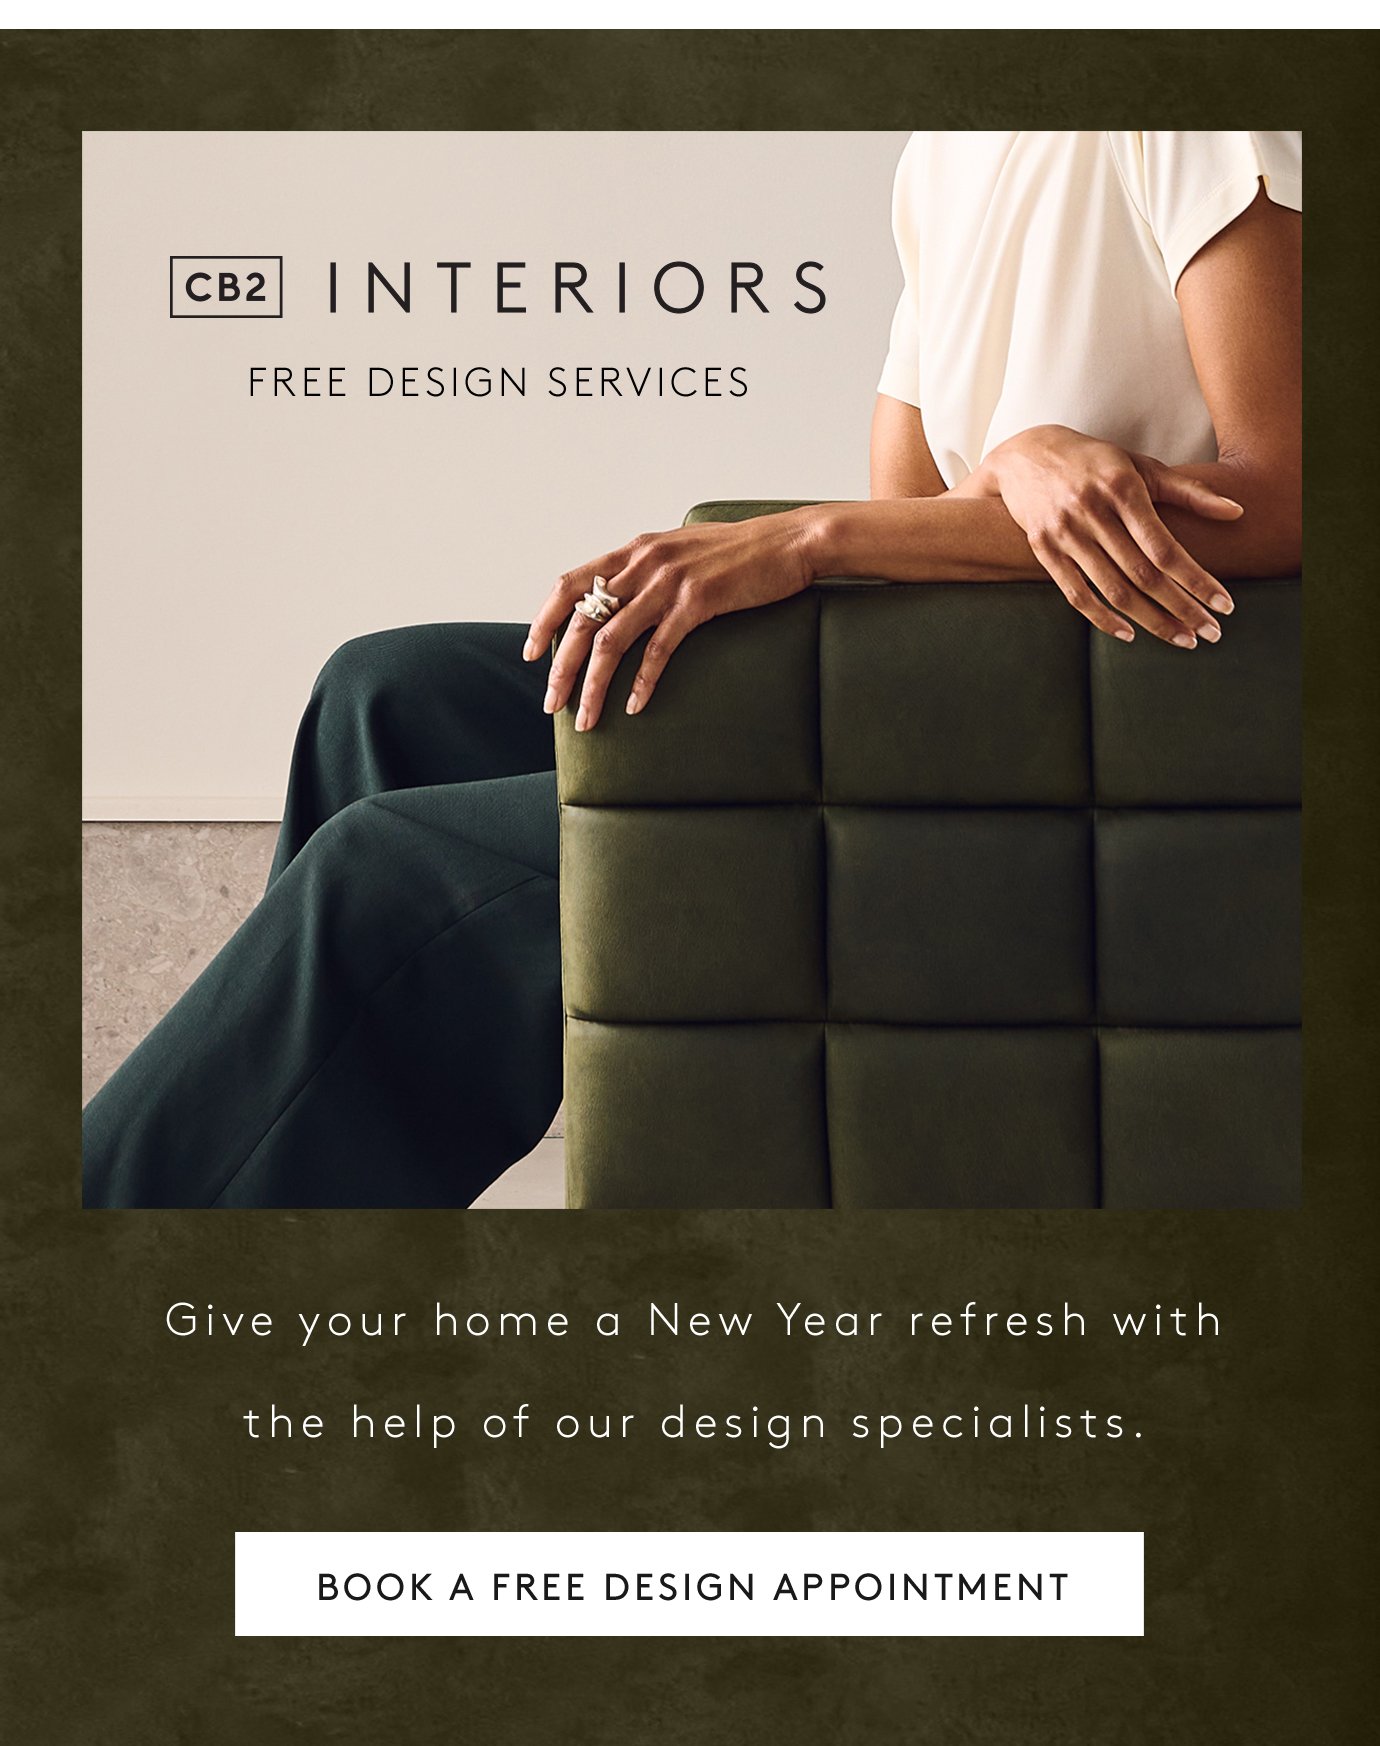 BOOK A FREE DESIGN APPOINTMENT